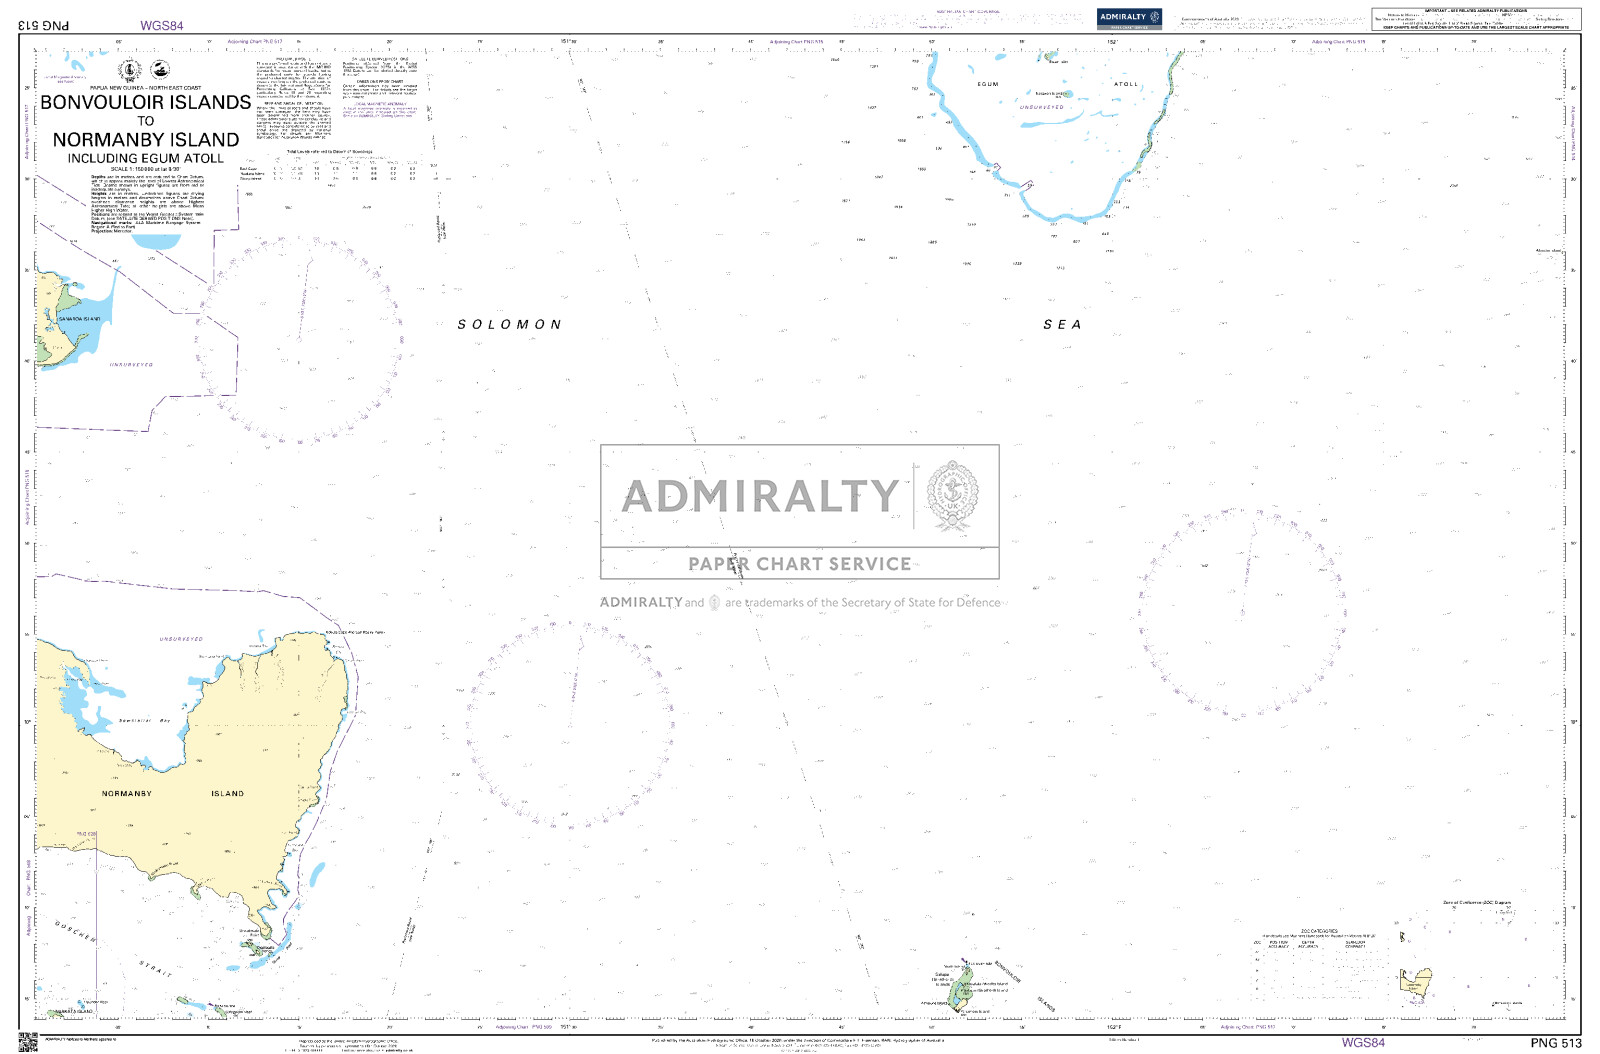 Bonvouloir Islands to Normanby Island including Egum Atoll. PNG513